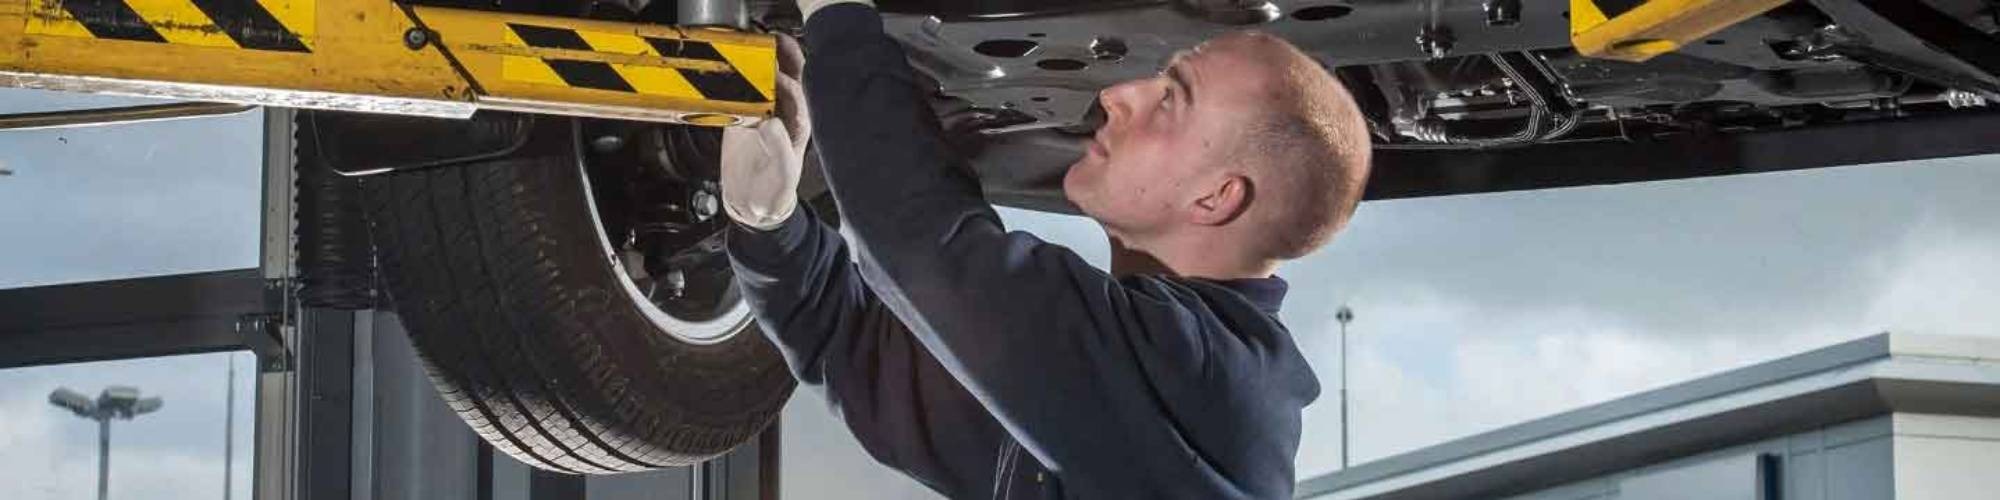 Car MOT - A Useful 2 Minute Check Before Your MOT Test